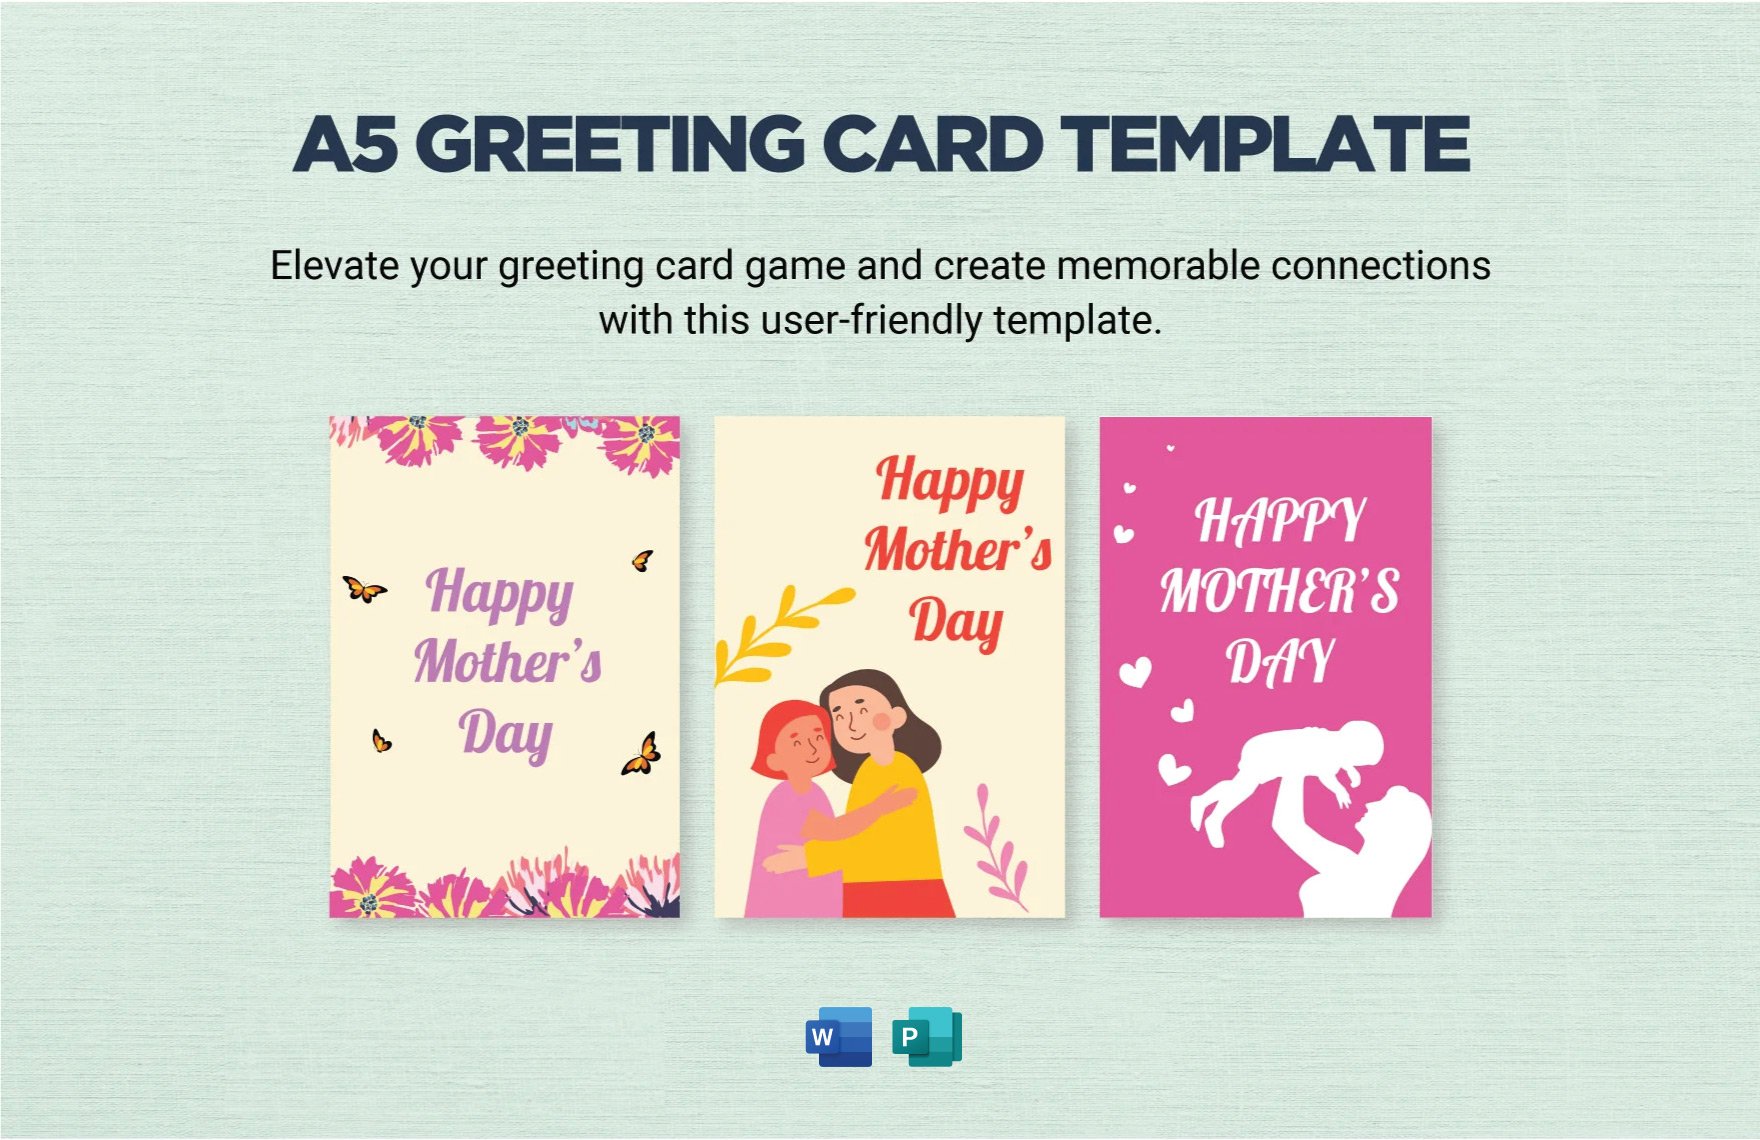 A5 Greeting Card Template